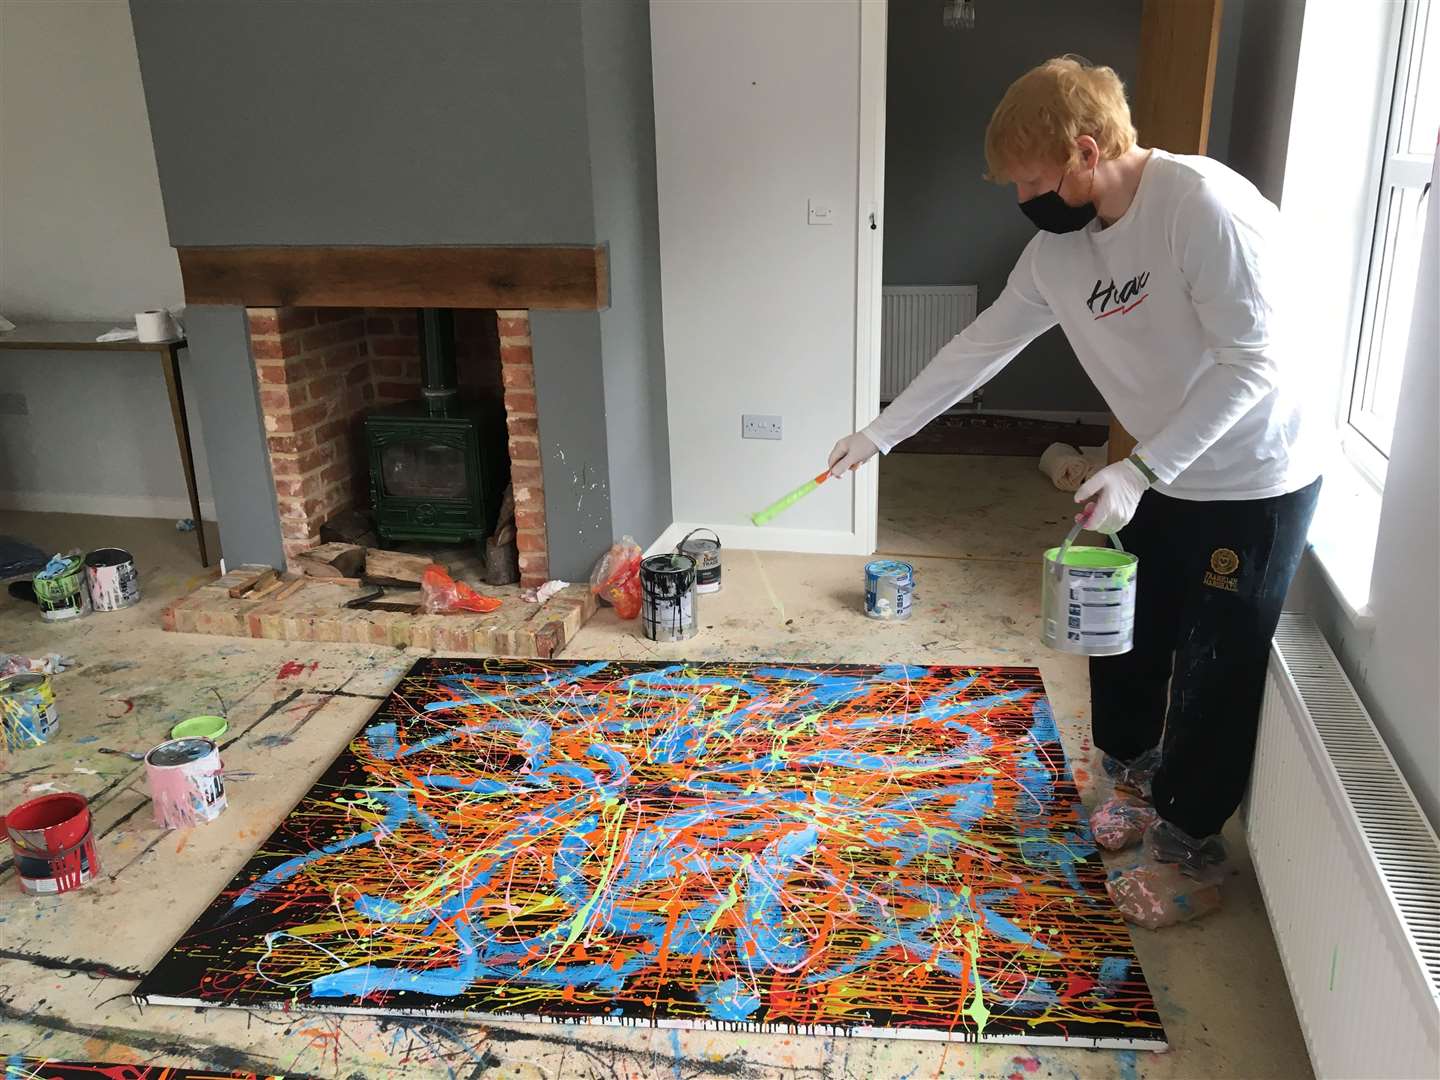 Ed Sheeran working on a separate painting (Ed Sheeran: Made In Suffolk Legacy Auction/PA)